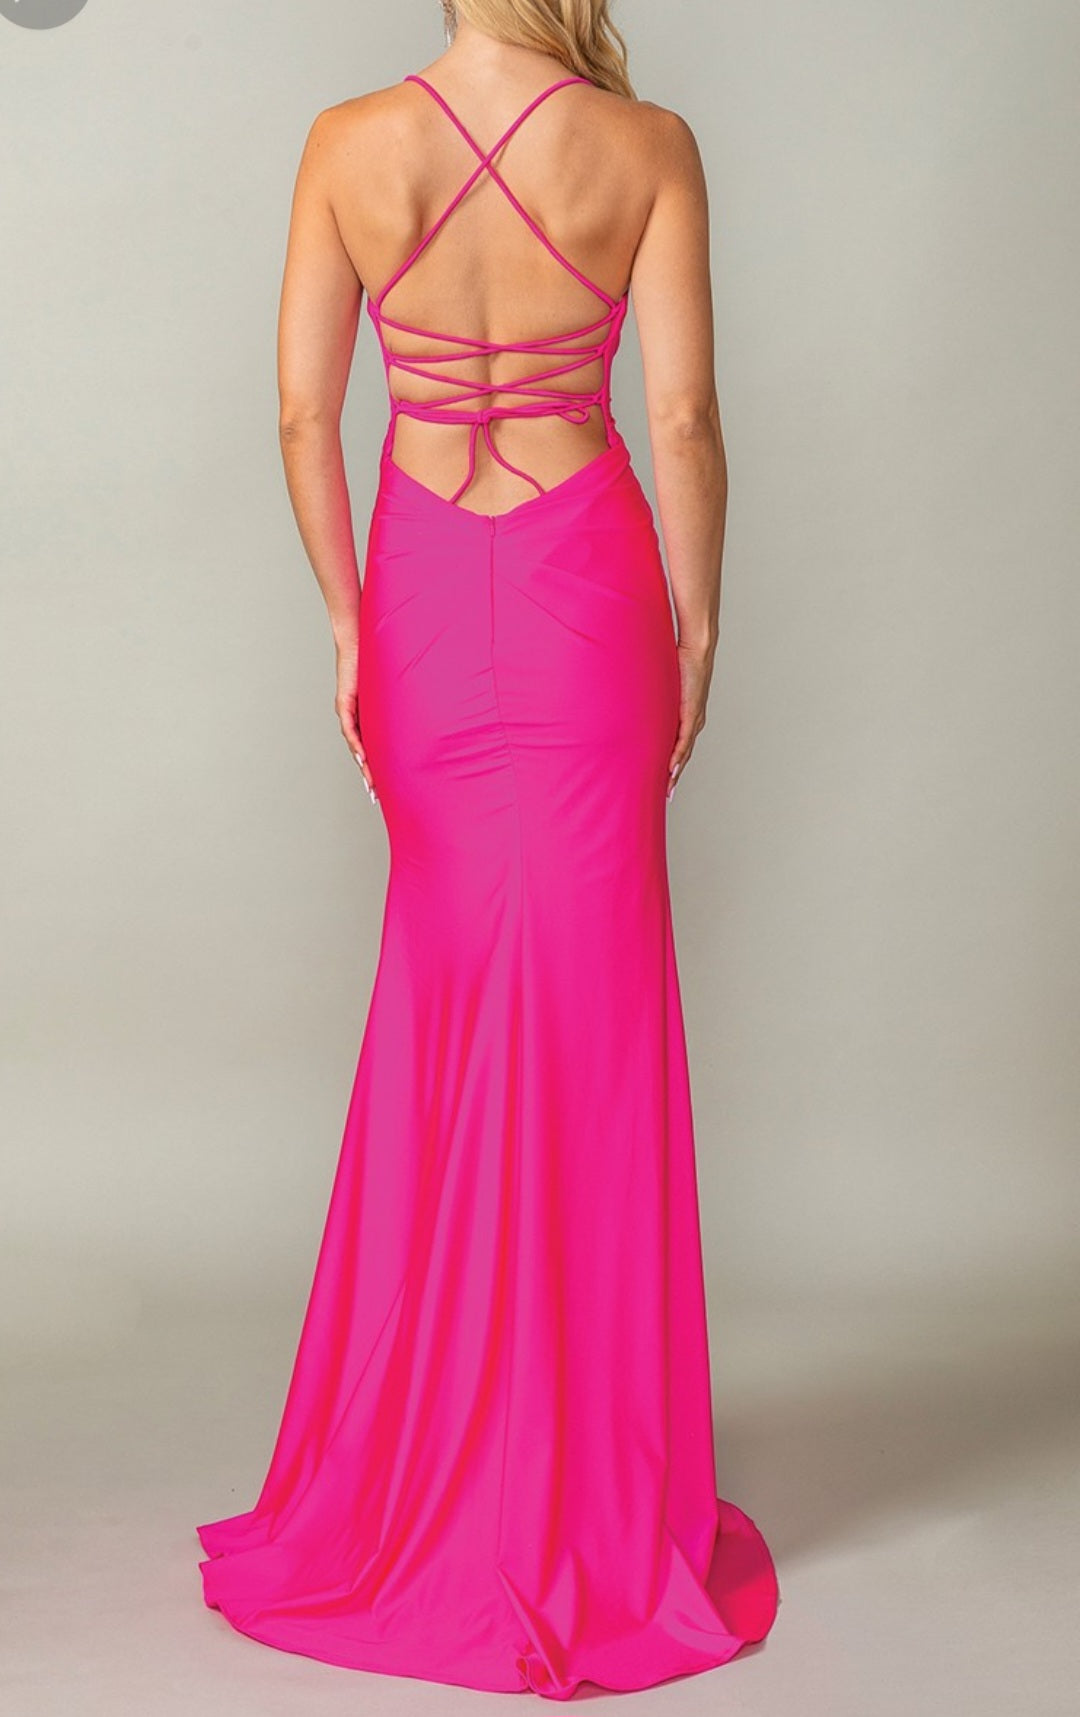 SLEEVELESS GOWN WITH JEWELED EMBELLISHMENTS